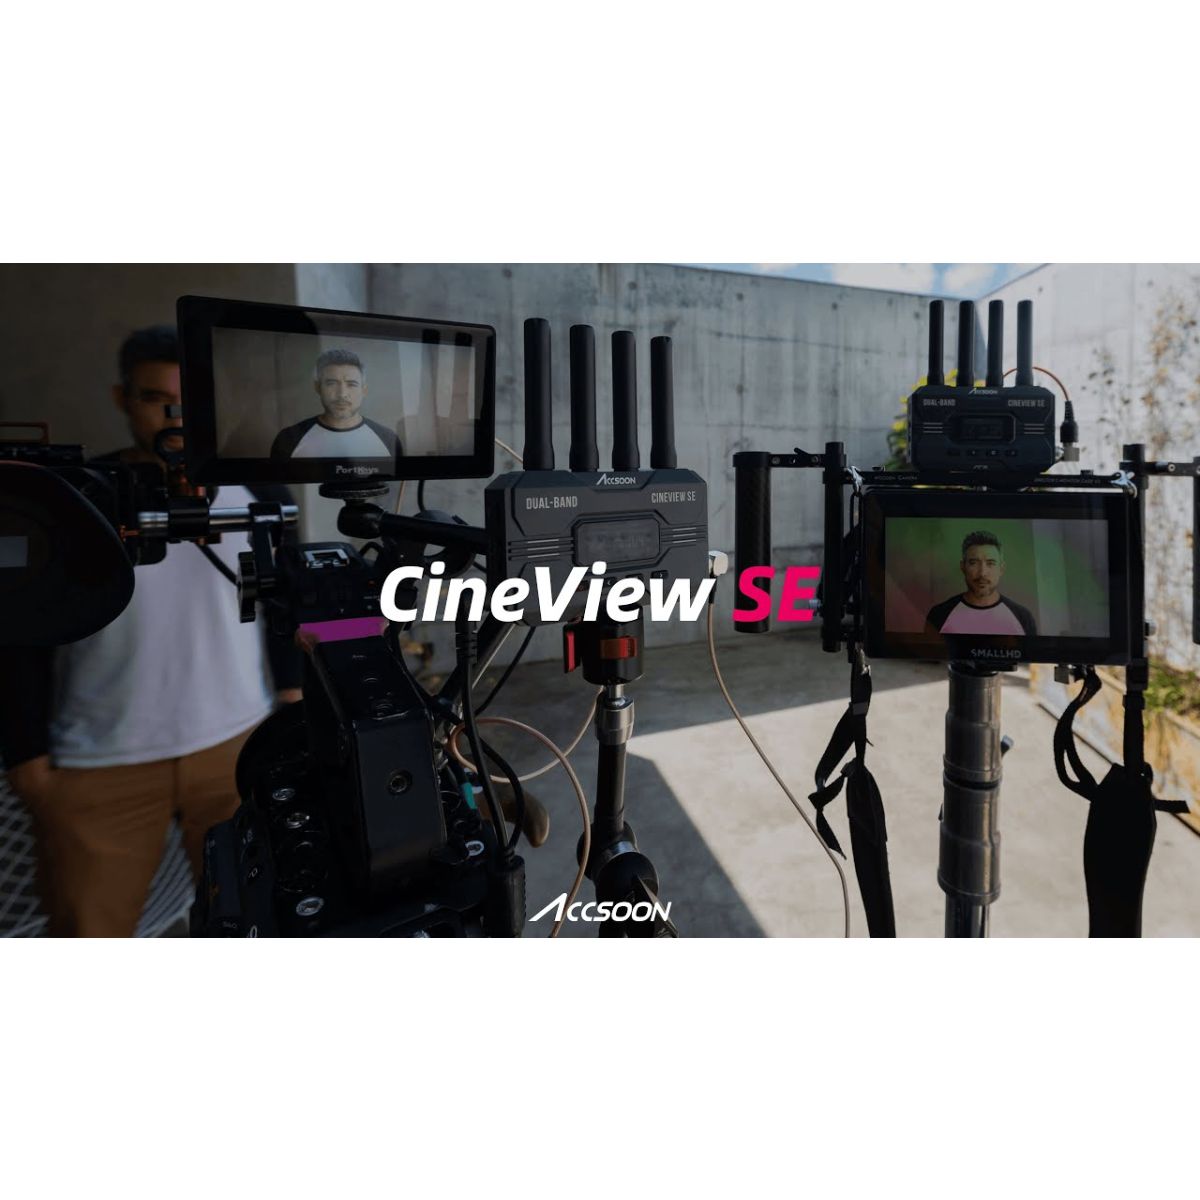 Accsoon CineView SE Receiver